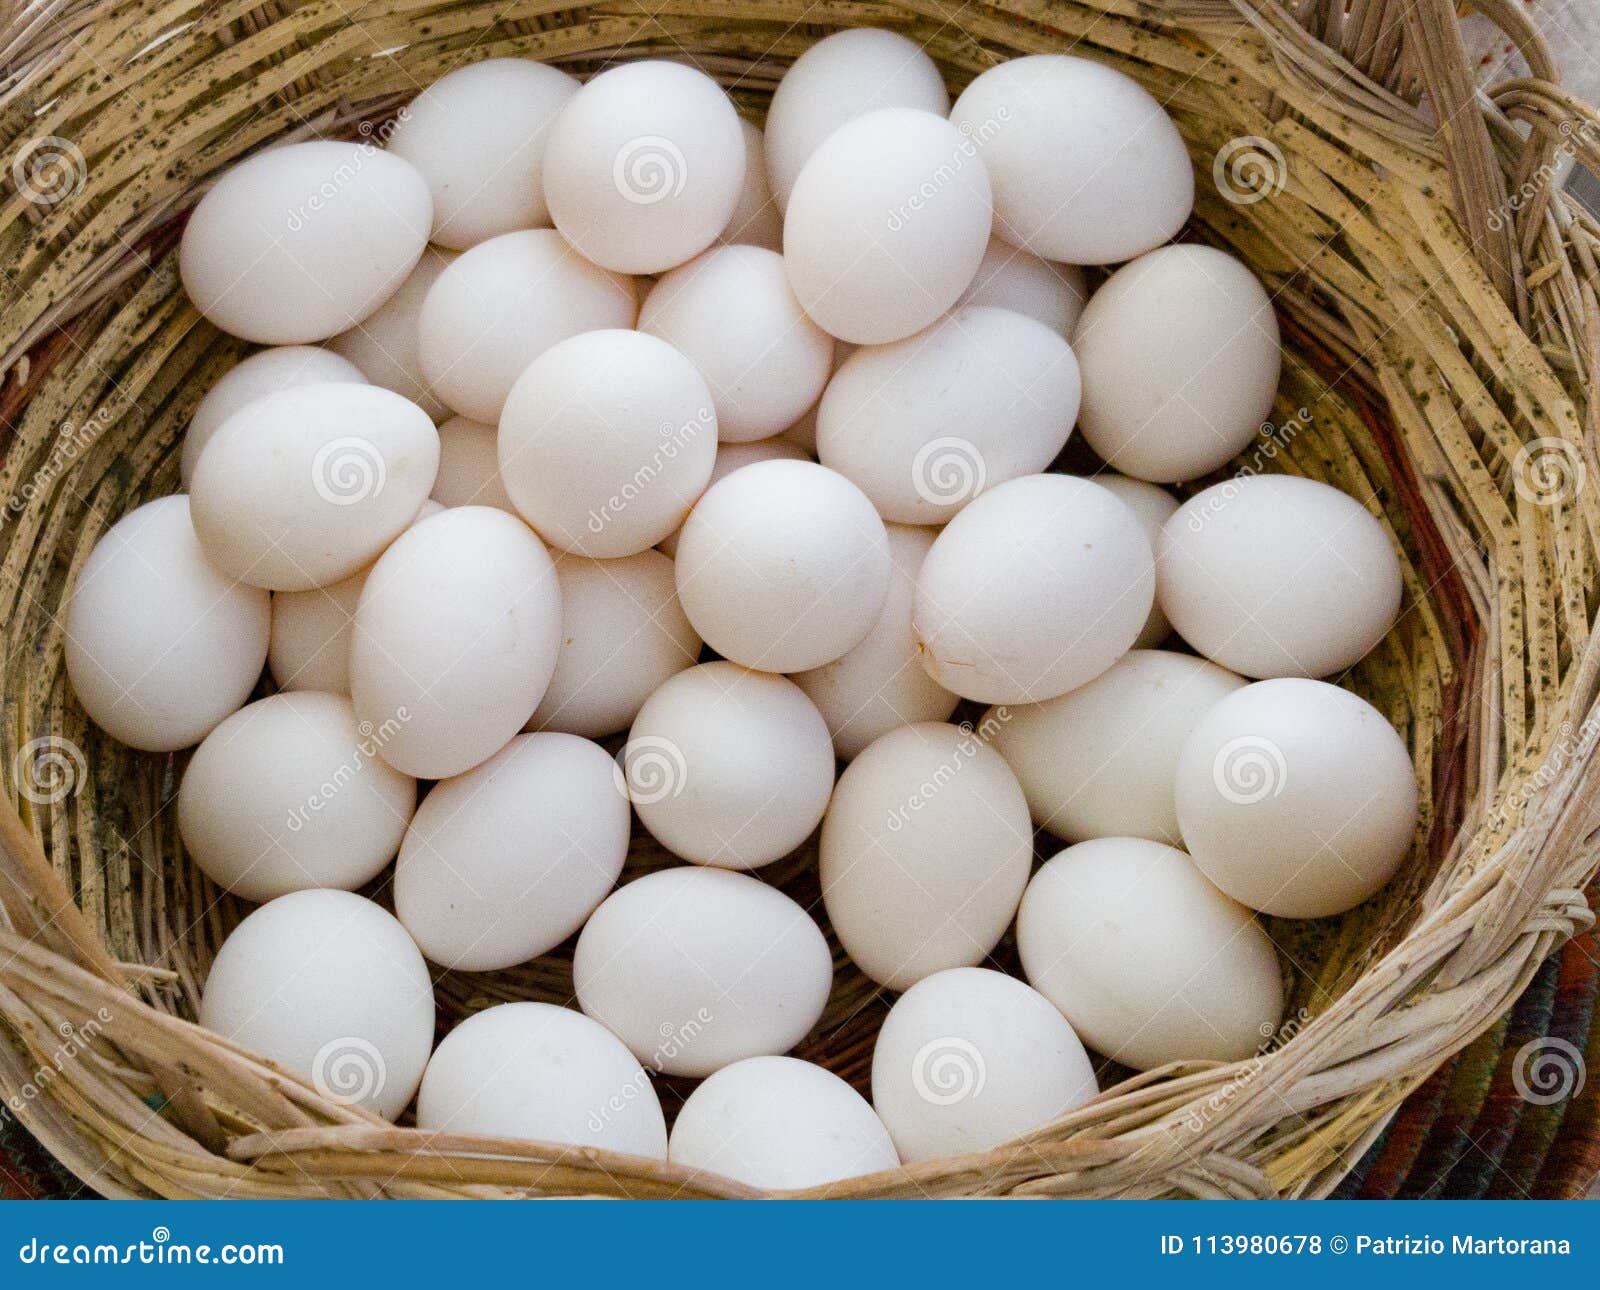 A lot of a white eggs stock photo. Image of cuisine ...